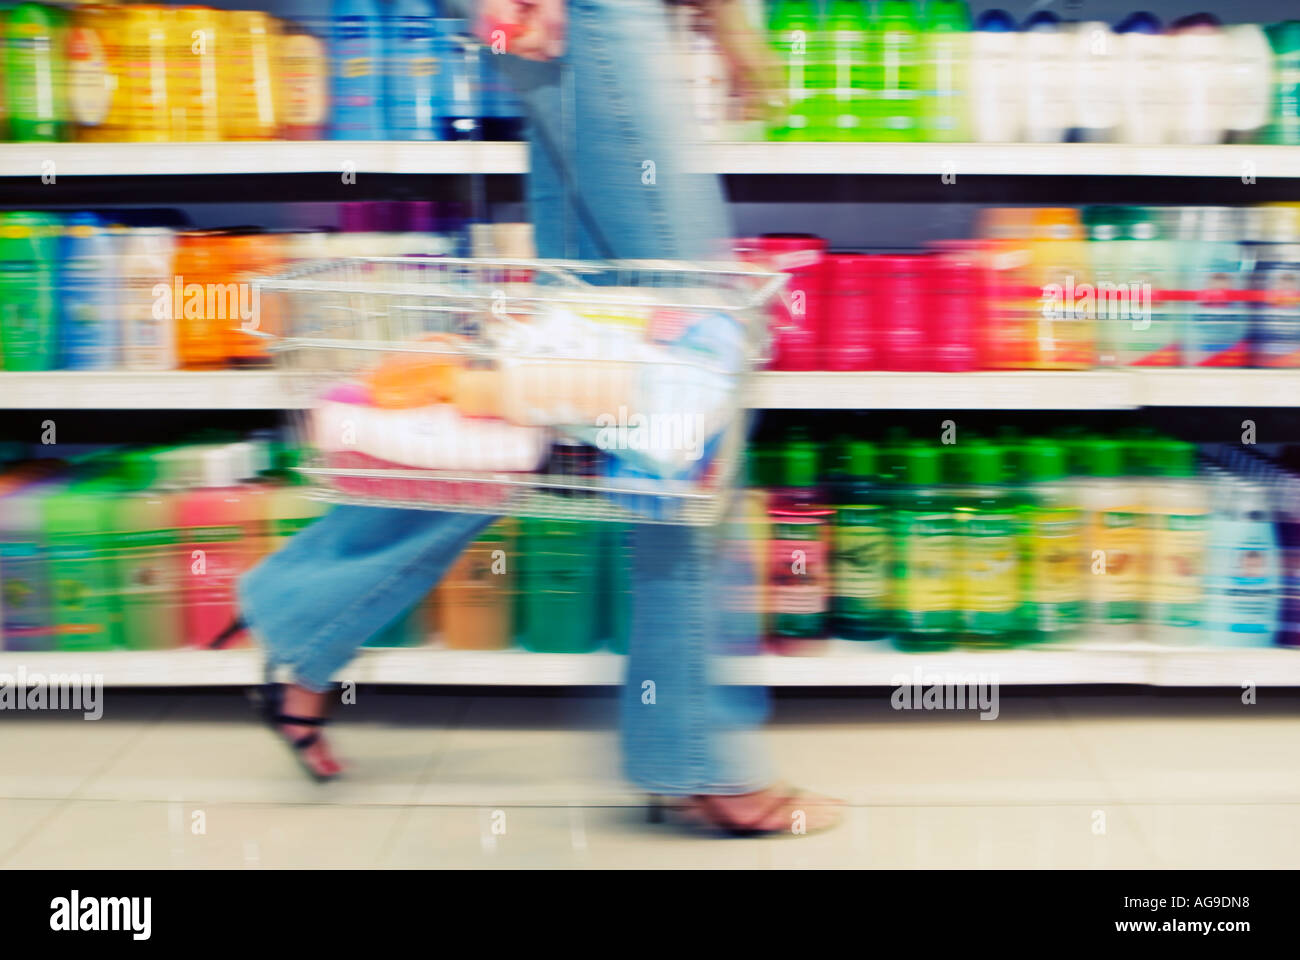 Young Woman Carrying a Shopping Basket in the Aisle of a Supermarket Low Section Stock Photo